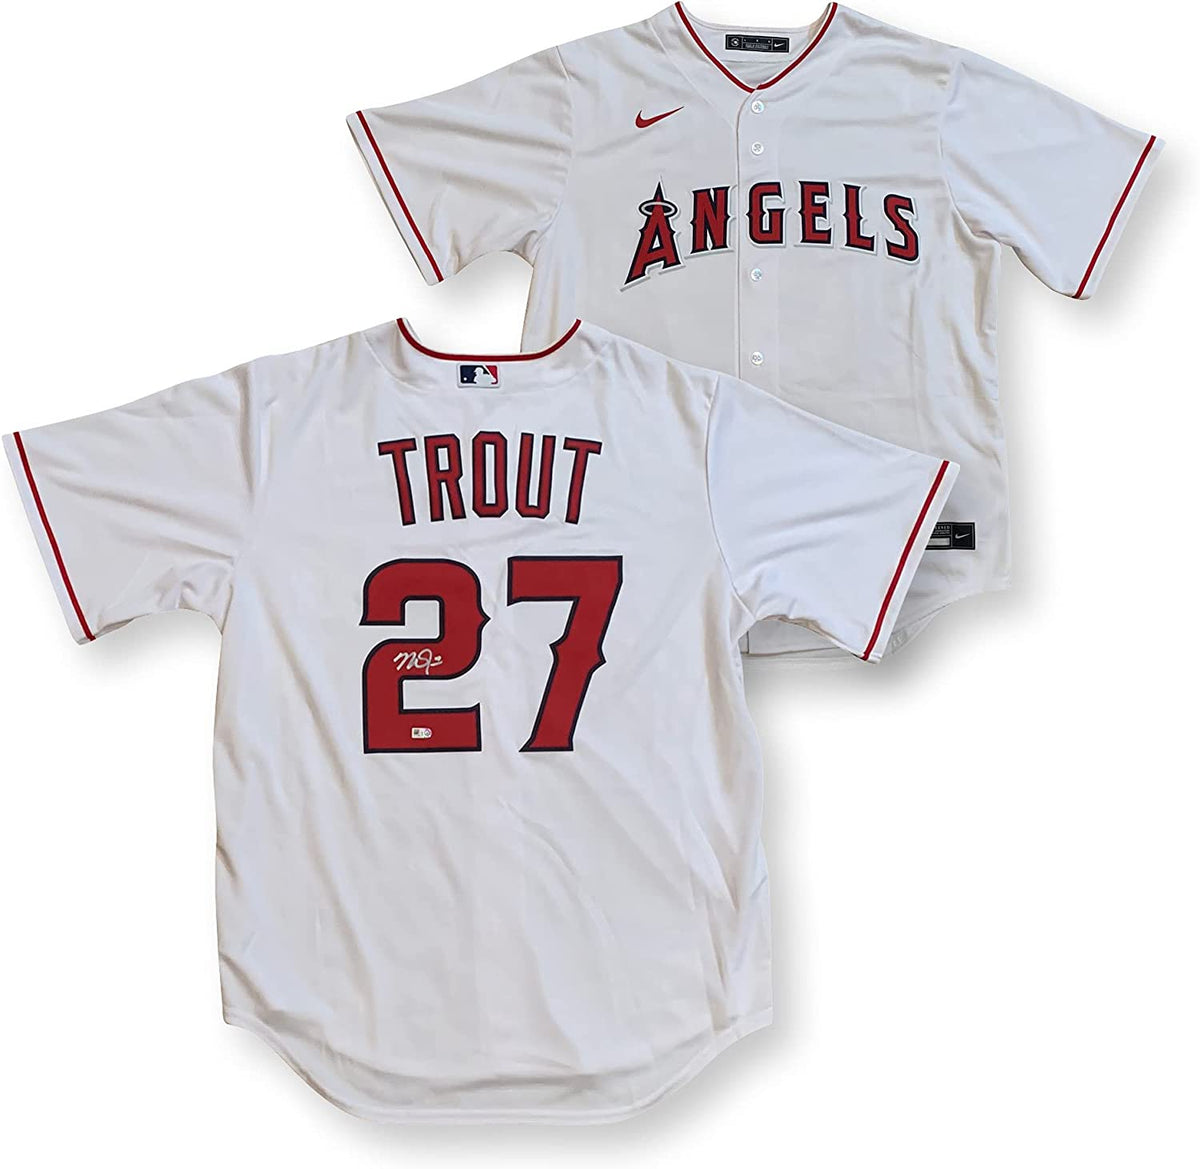 Mike Trout Signed All-Star Jersey Inscribed 2012 All Star (MLB Hologram)